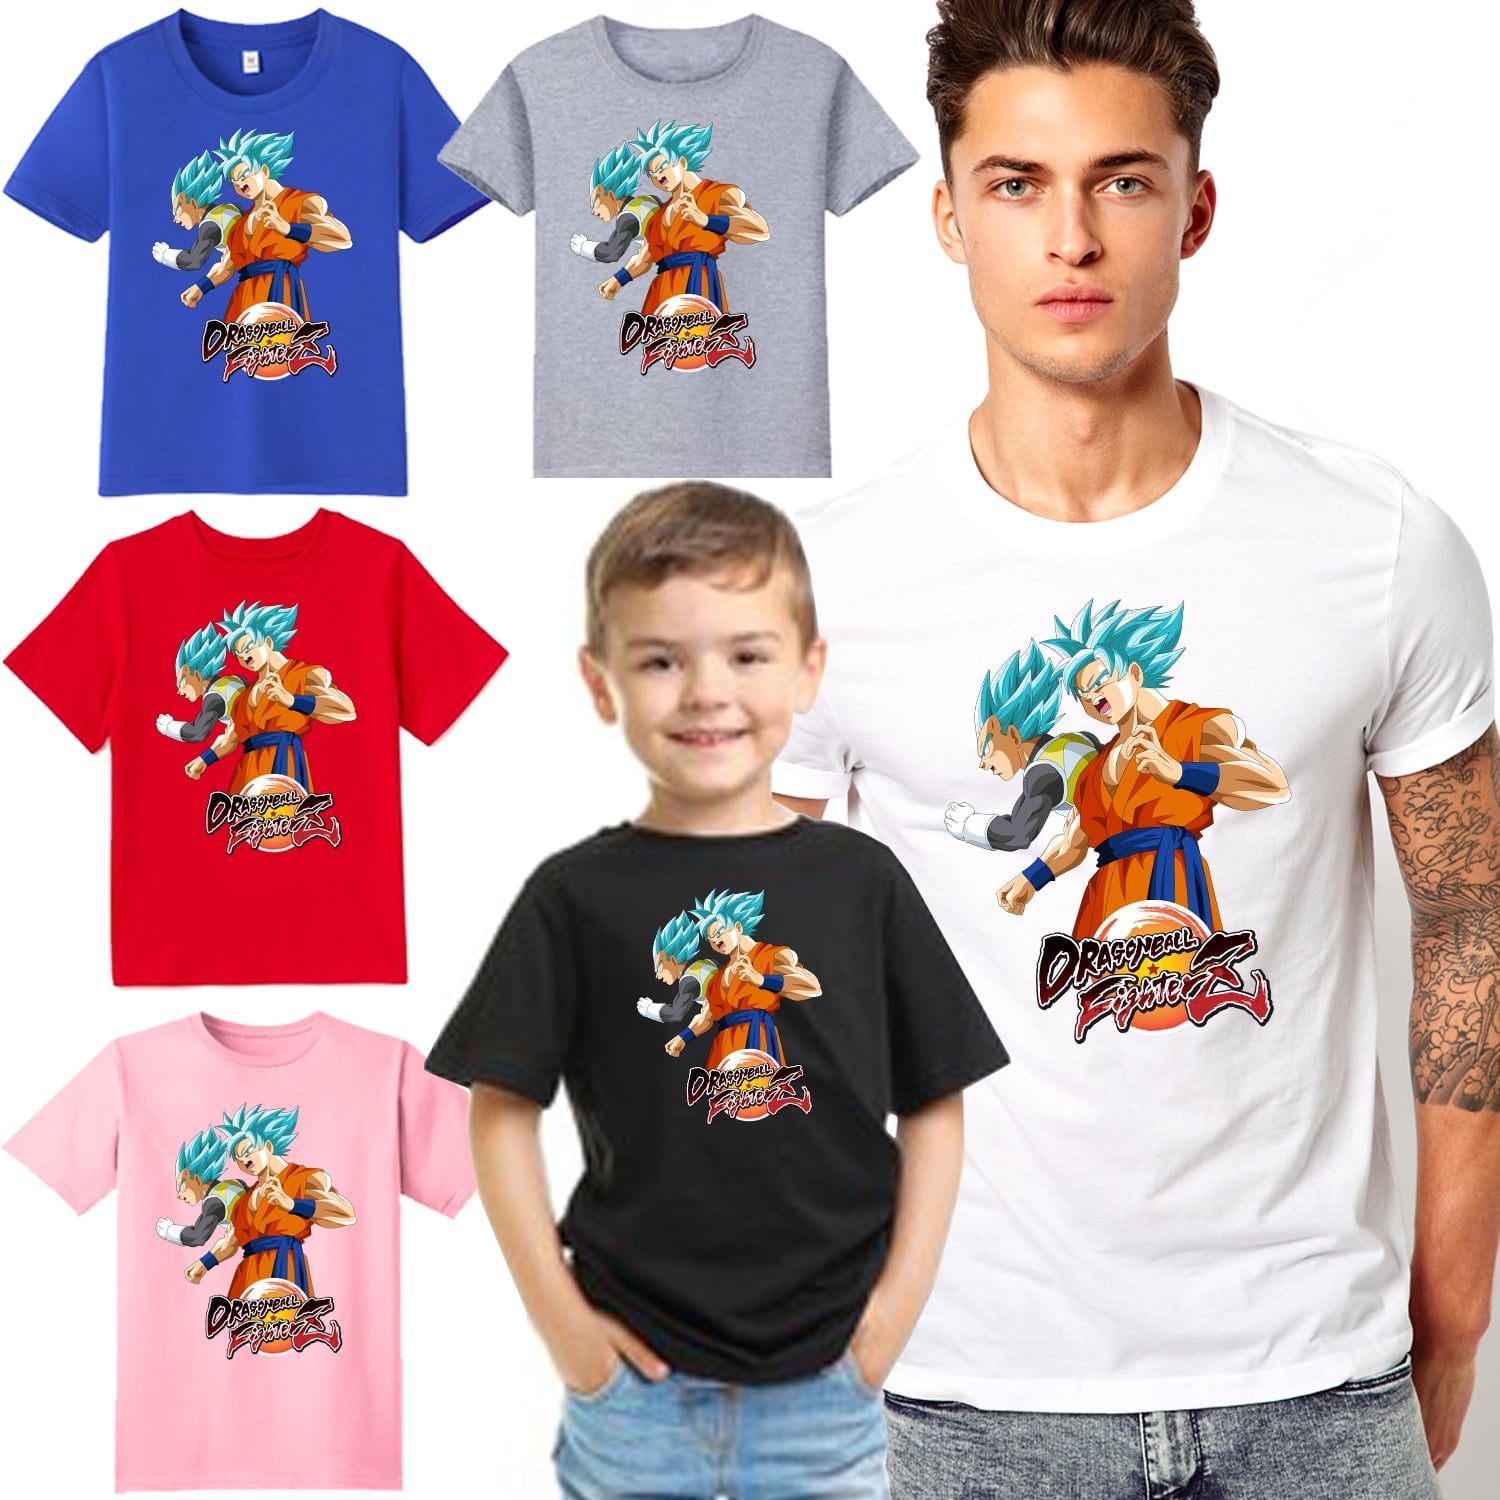 Anime Kids TShirts for Sale  Redbubble